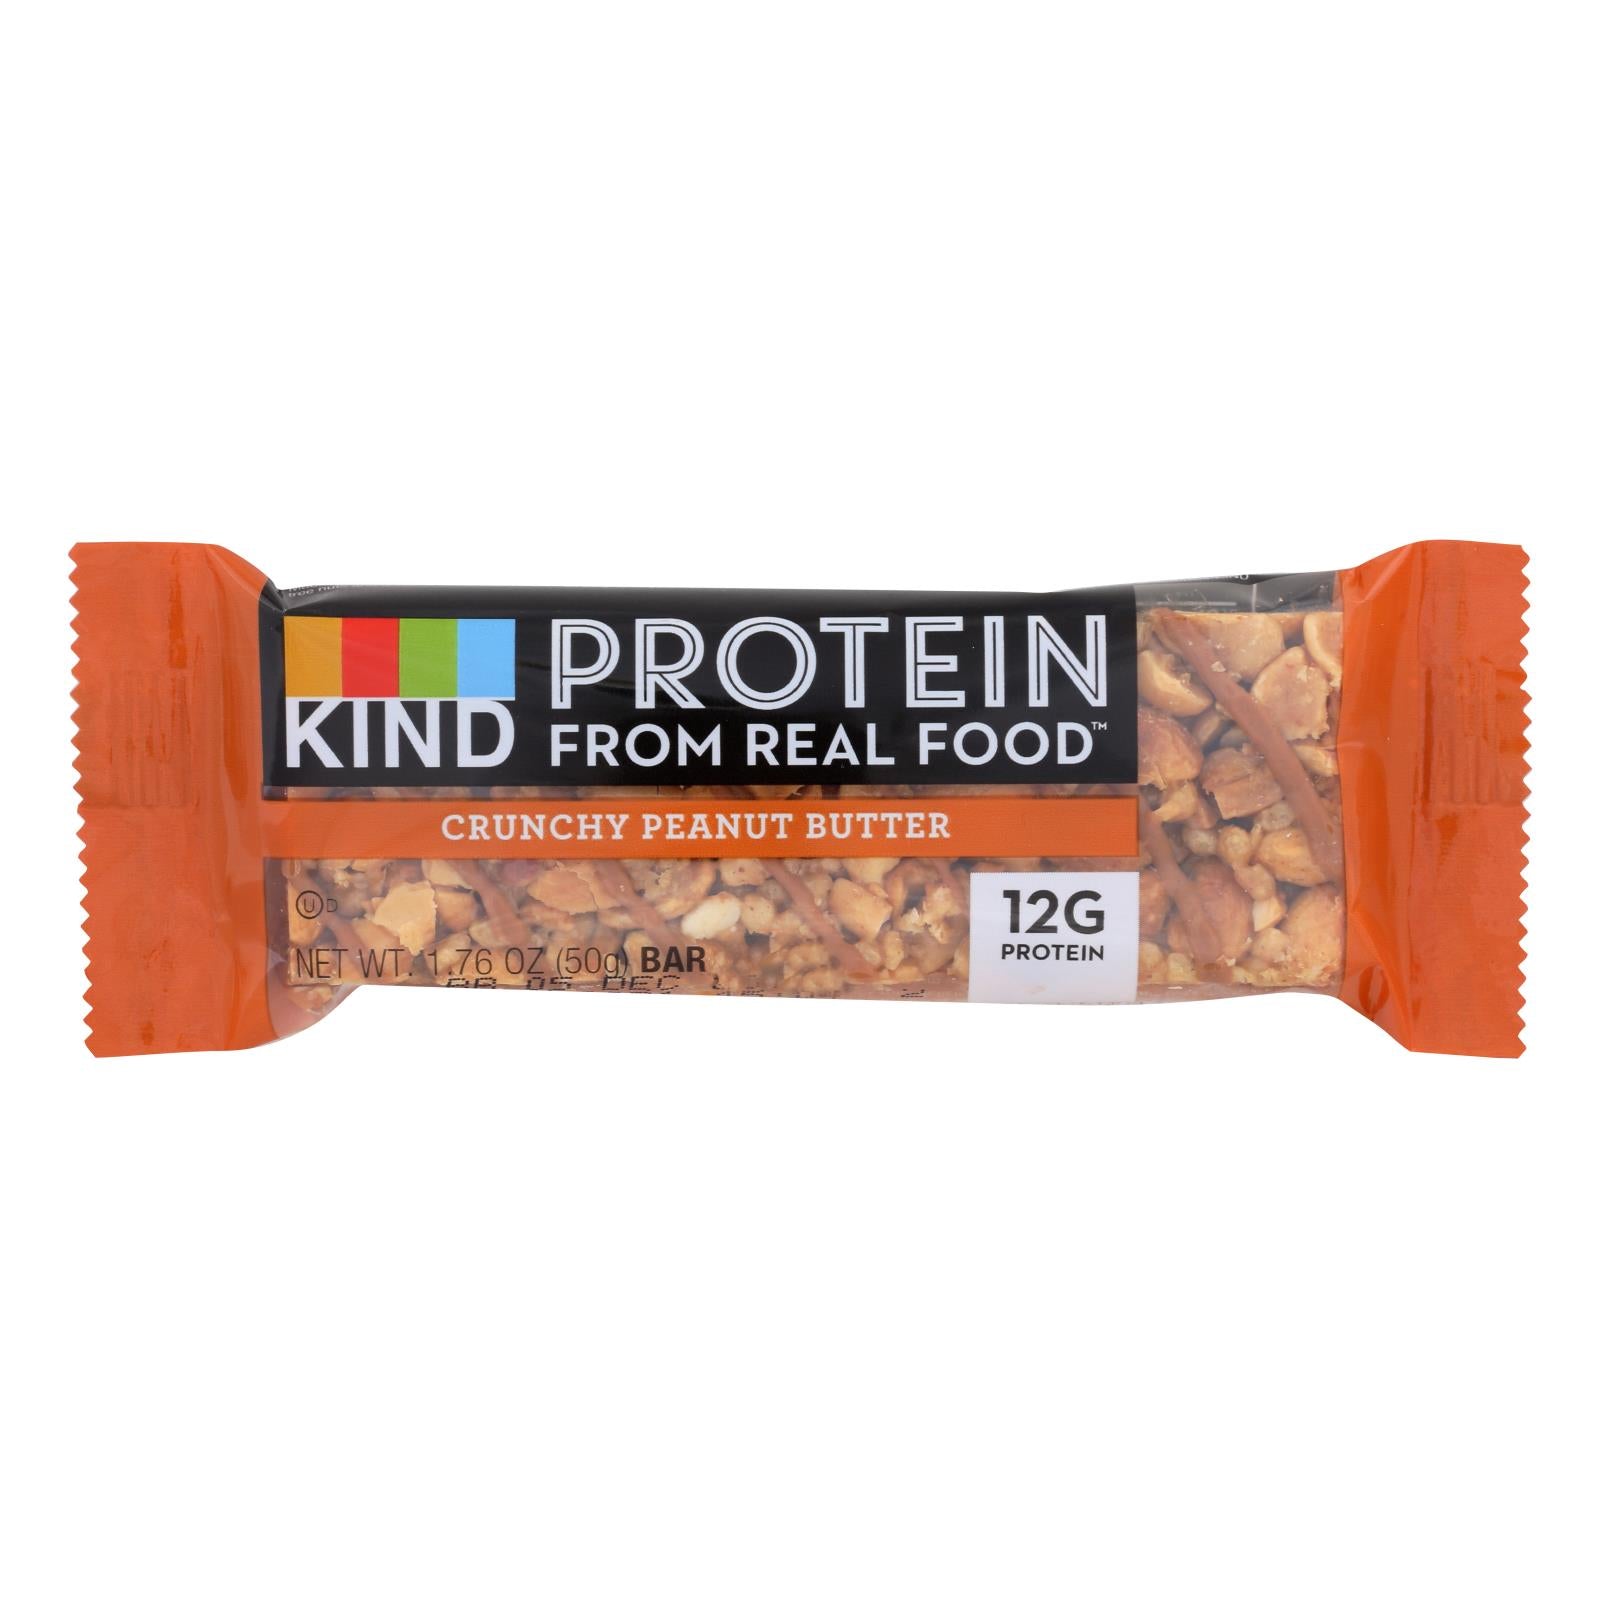 W H EDWARDS CO, KIND Crunchy Peanut Butter Protein Bar 1.76 oz Packet (Pack of 12)